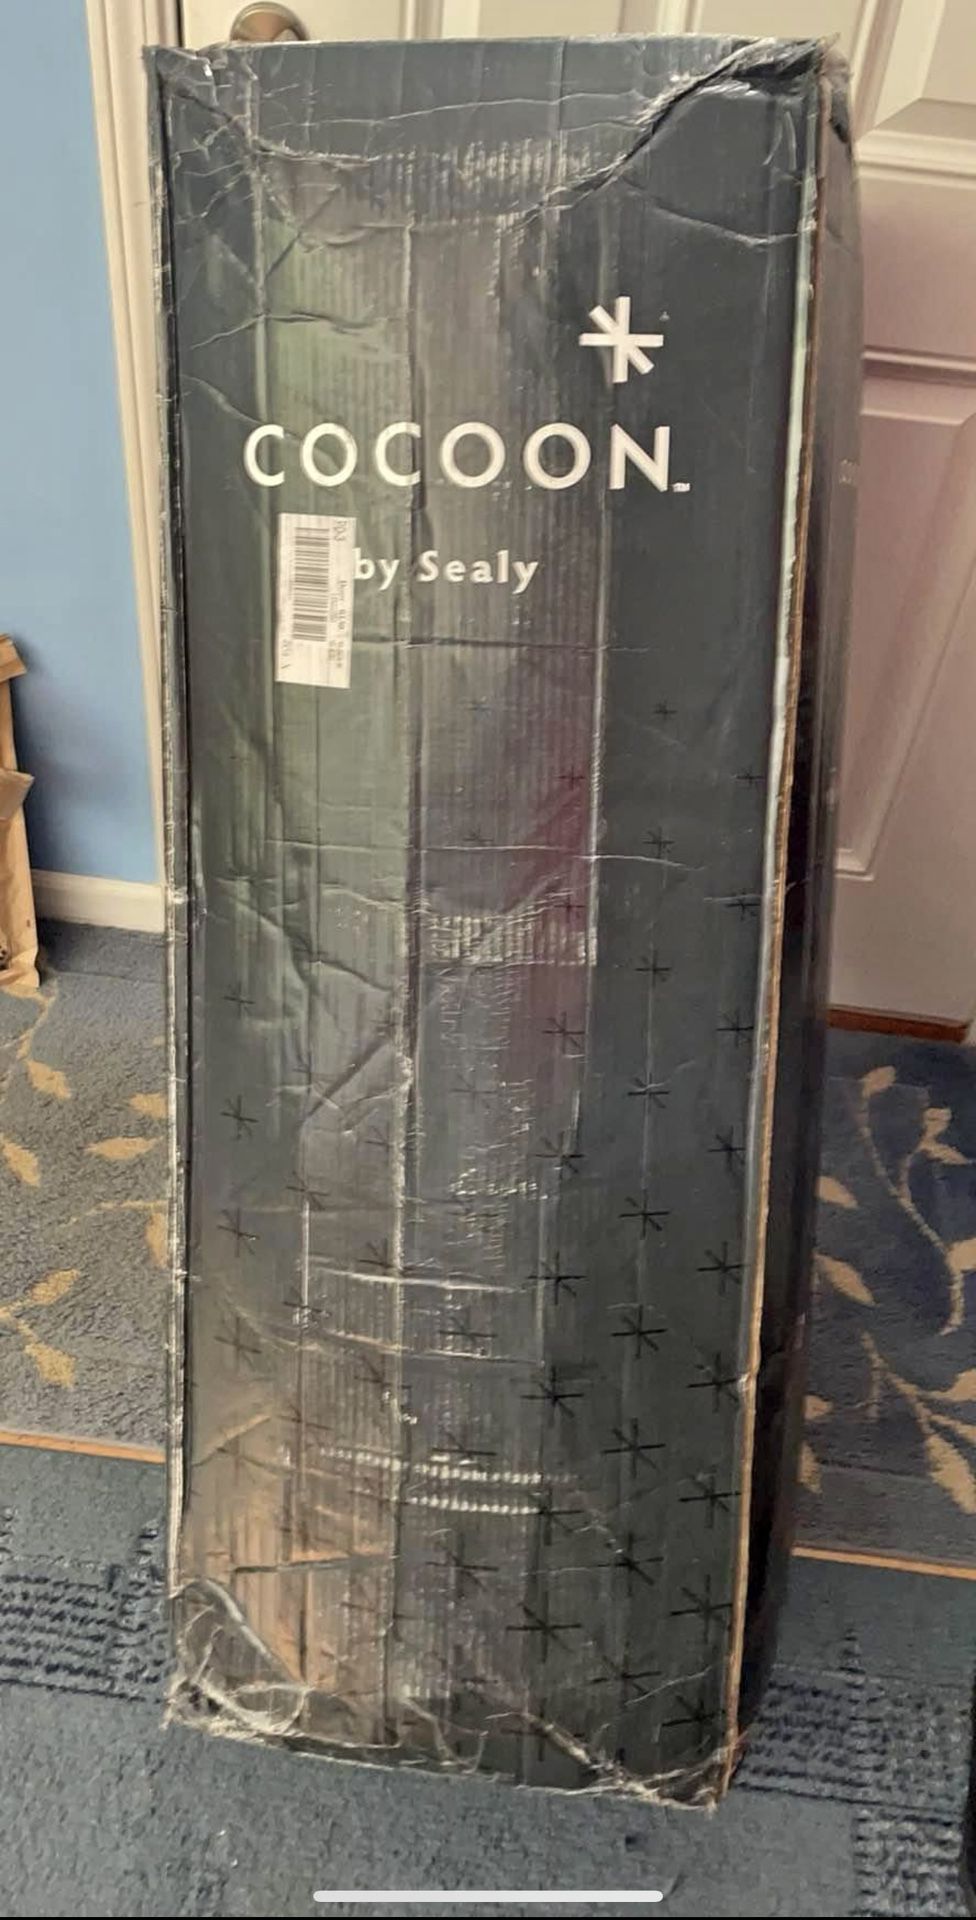 Sealy Cocoon Mattress 